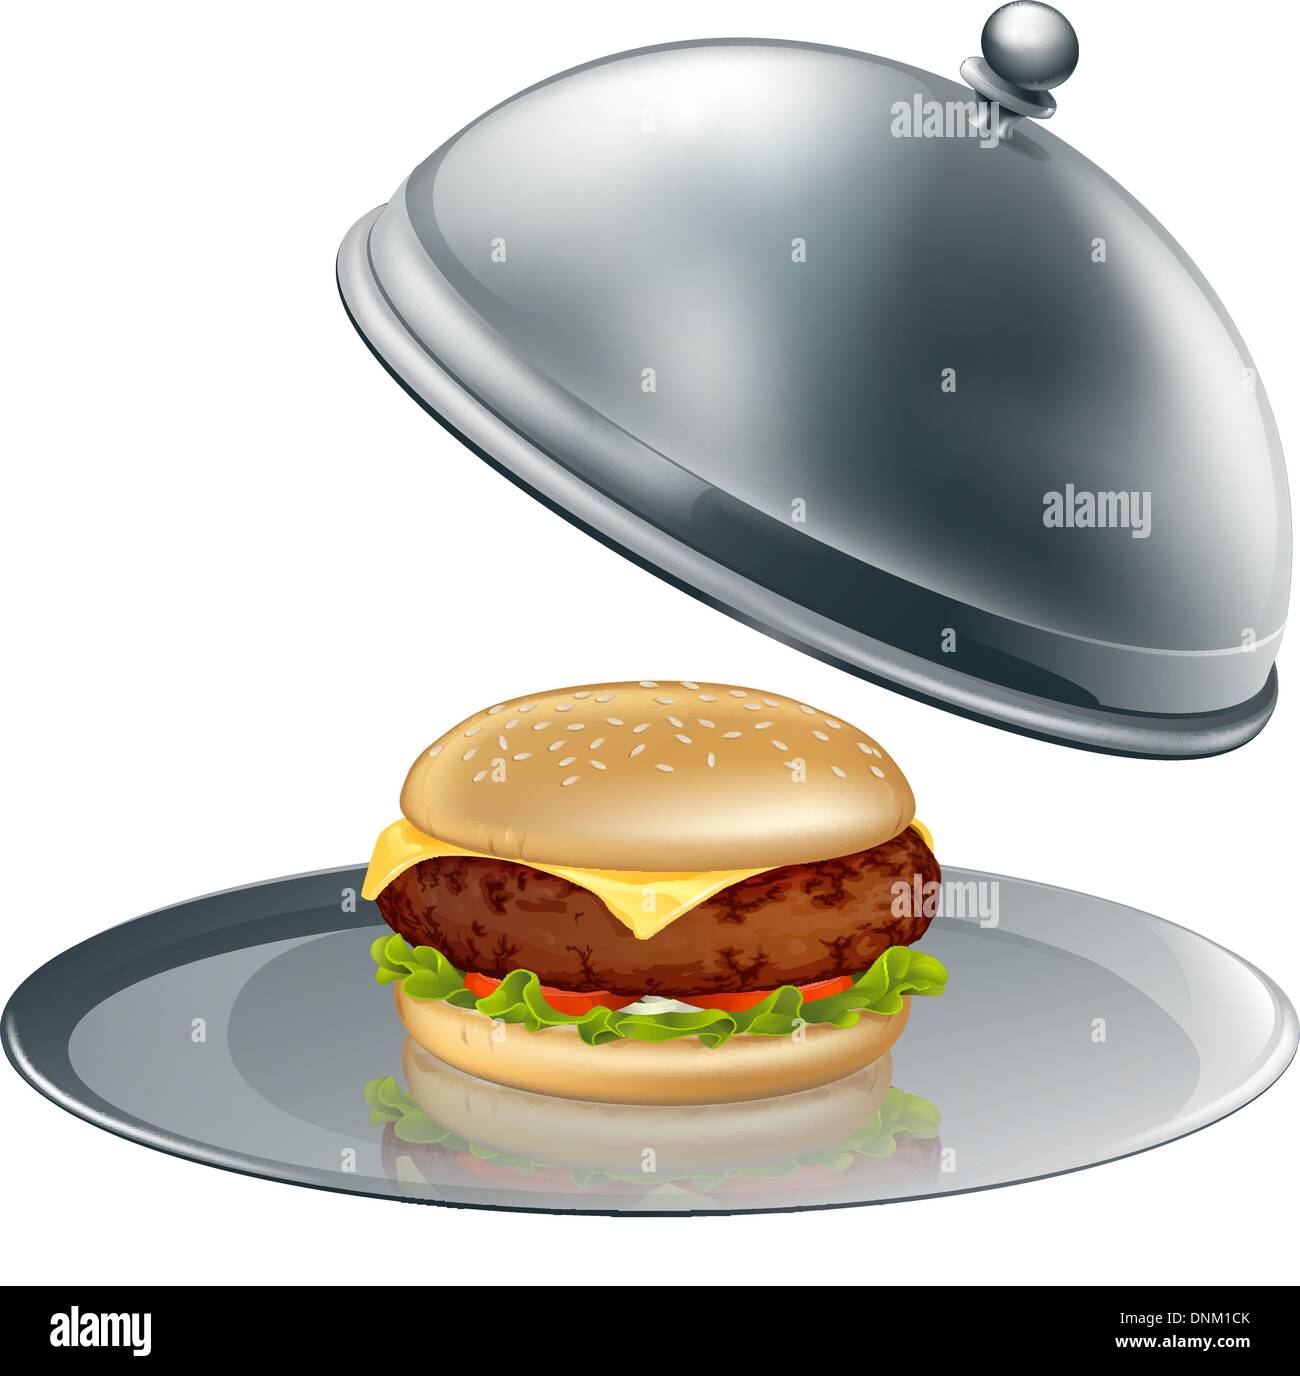 Illustration of a cheese burger on silver platter. Could be a concept for inflated worth or luxury burgers. Stock Vector